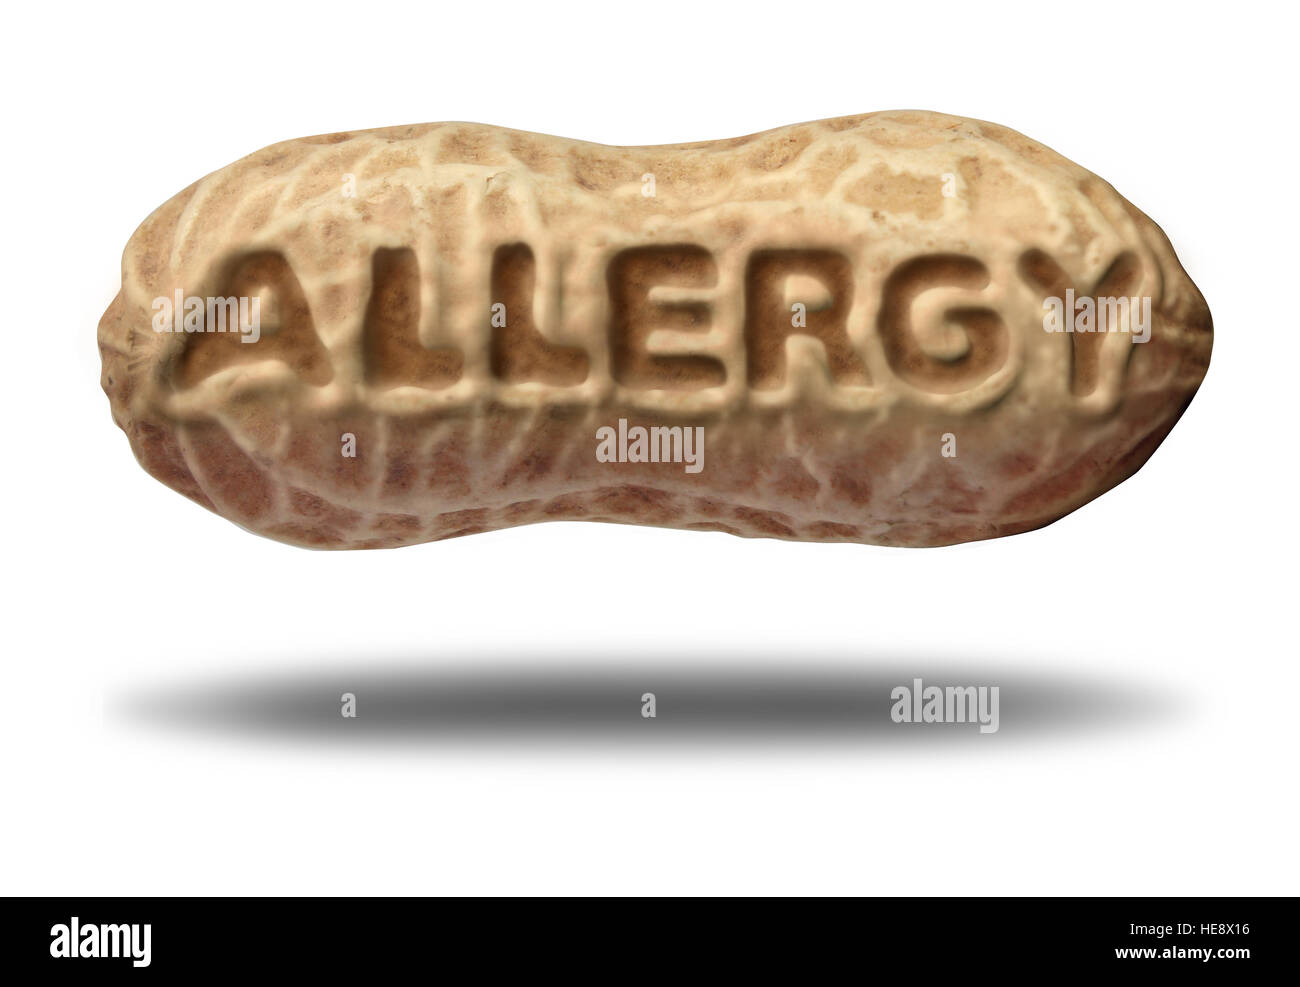 Peanut allergy concept and nut allergies medical symbol with text embossed in a shelled ingredient as an allergen warning with 3D illustration element Stock Photo